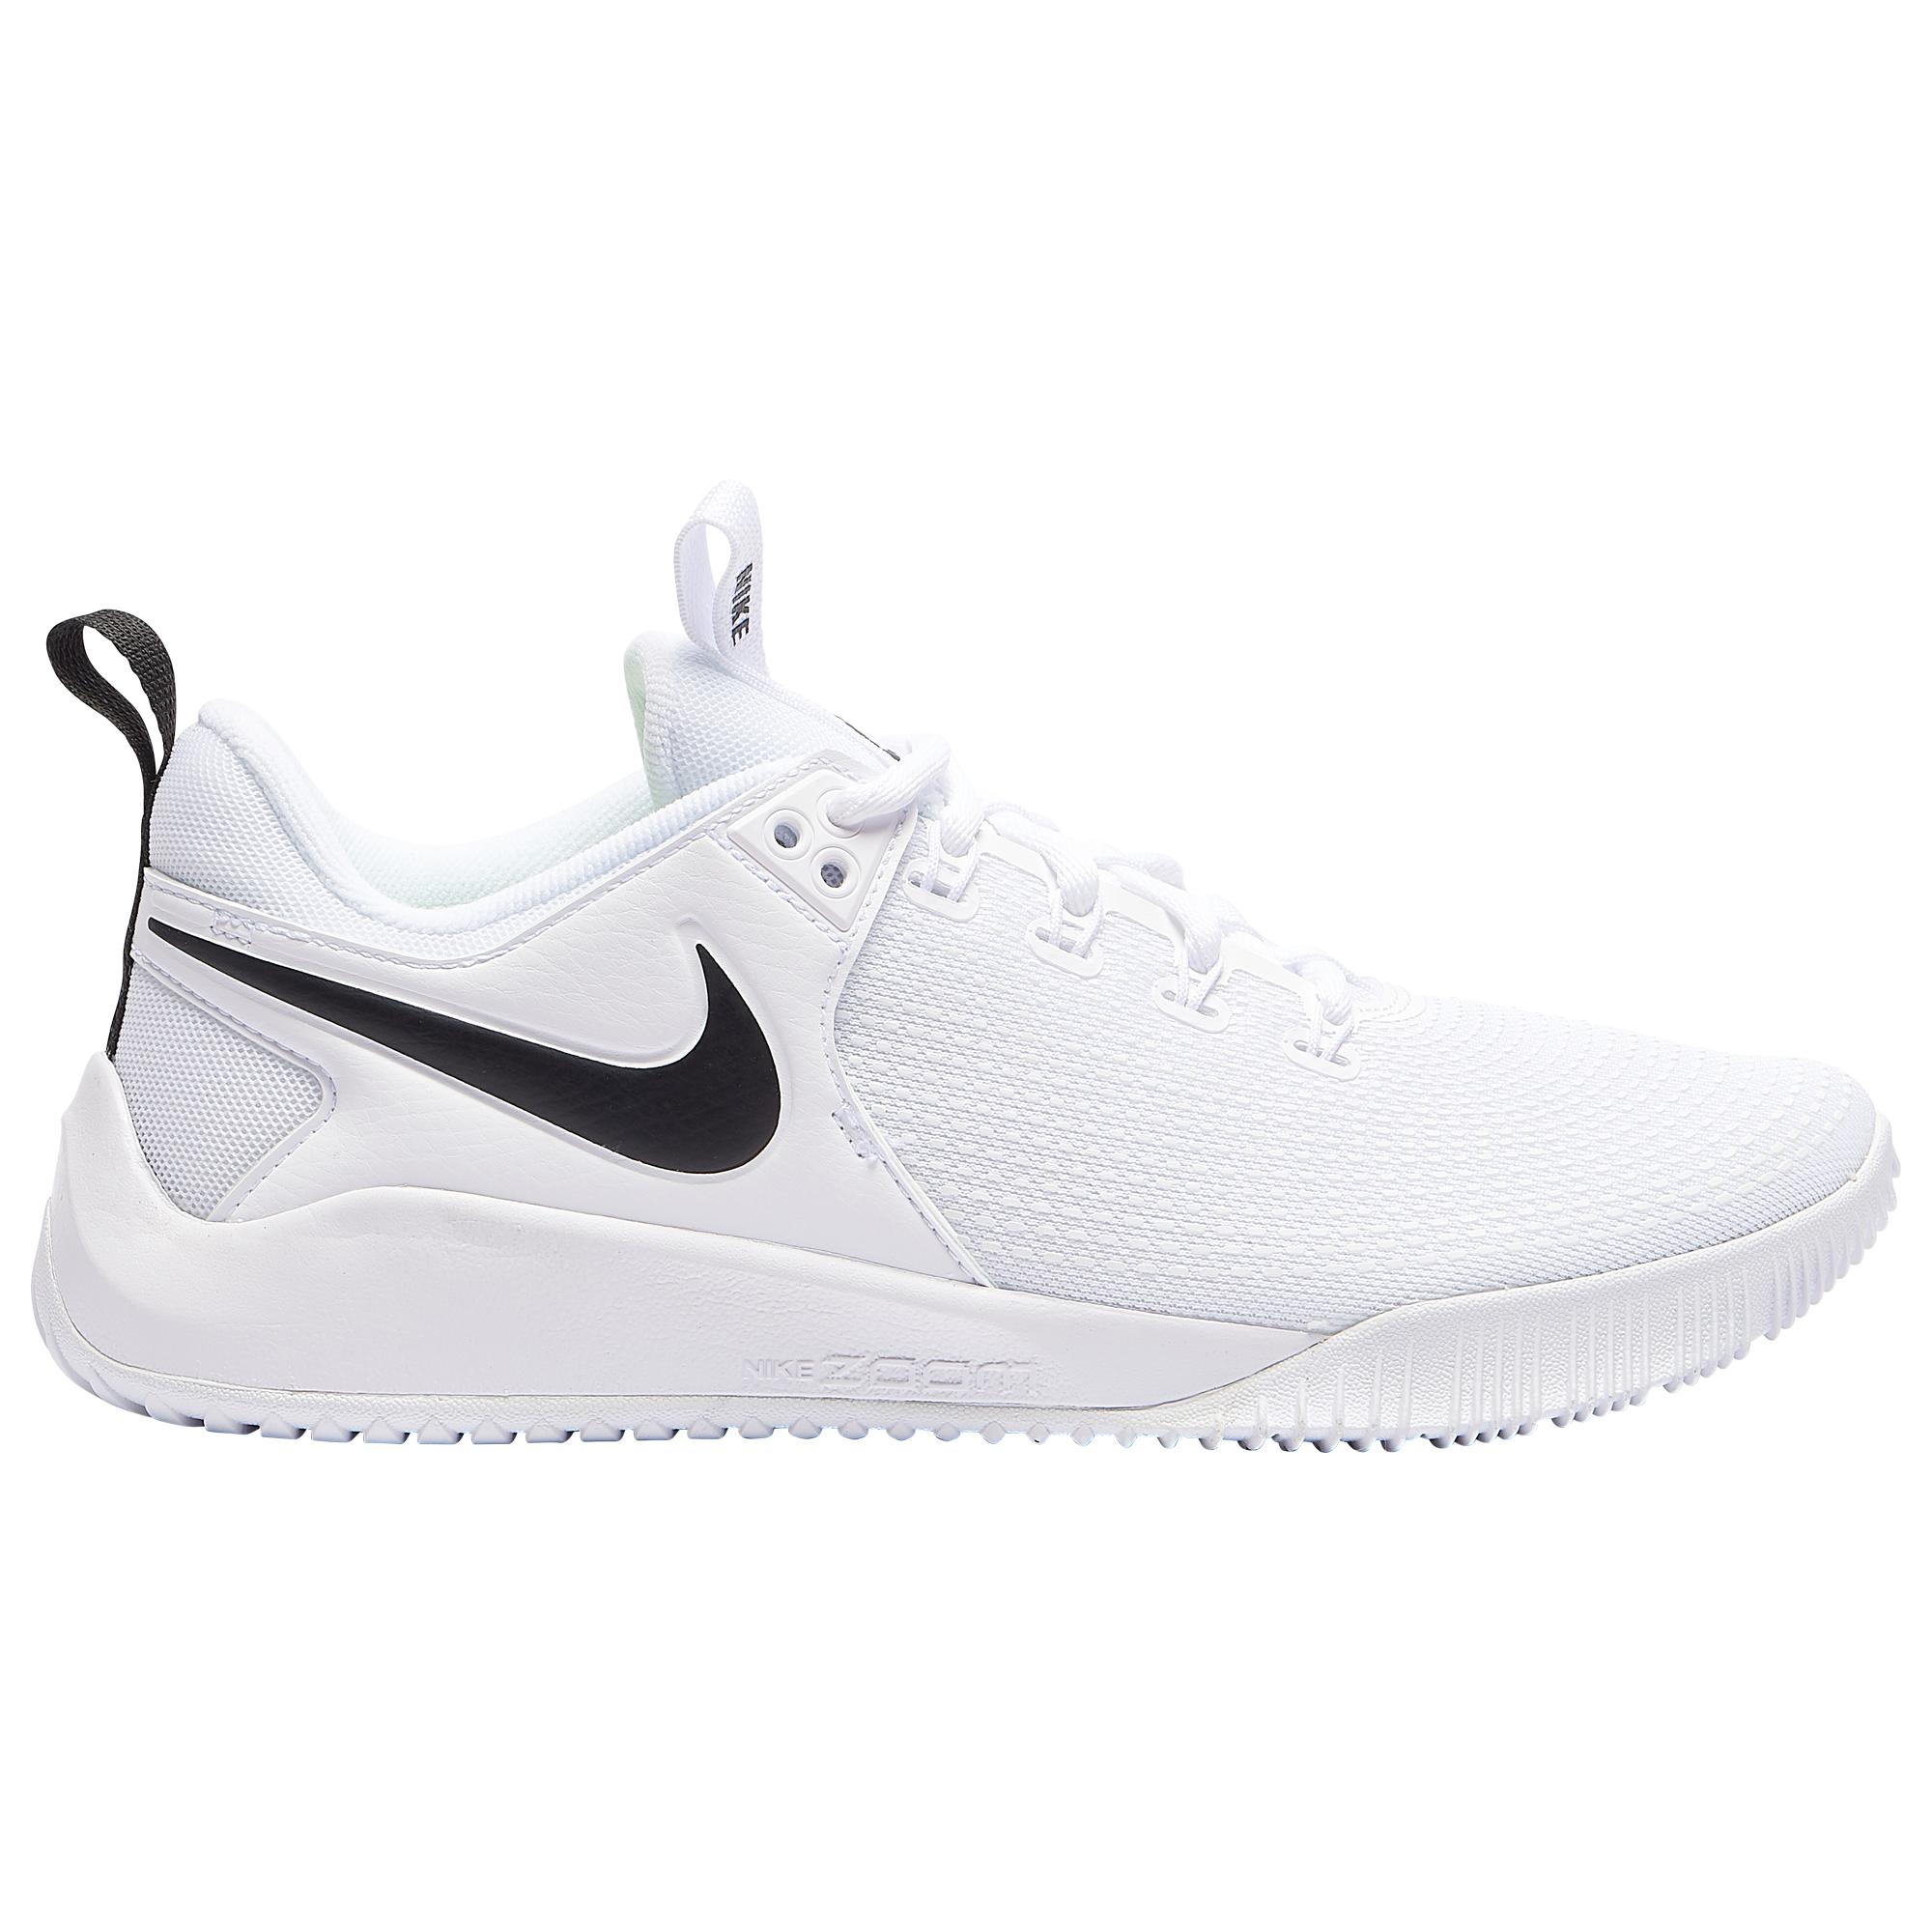 Nike Rubber Zoom Hyperace 2 - Volleyball Shoes in White/Black (White) | Lyst